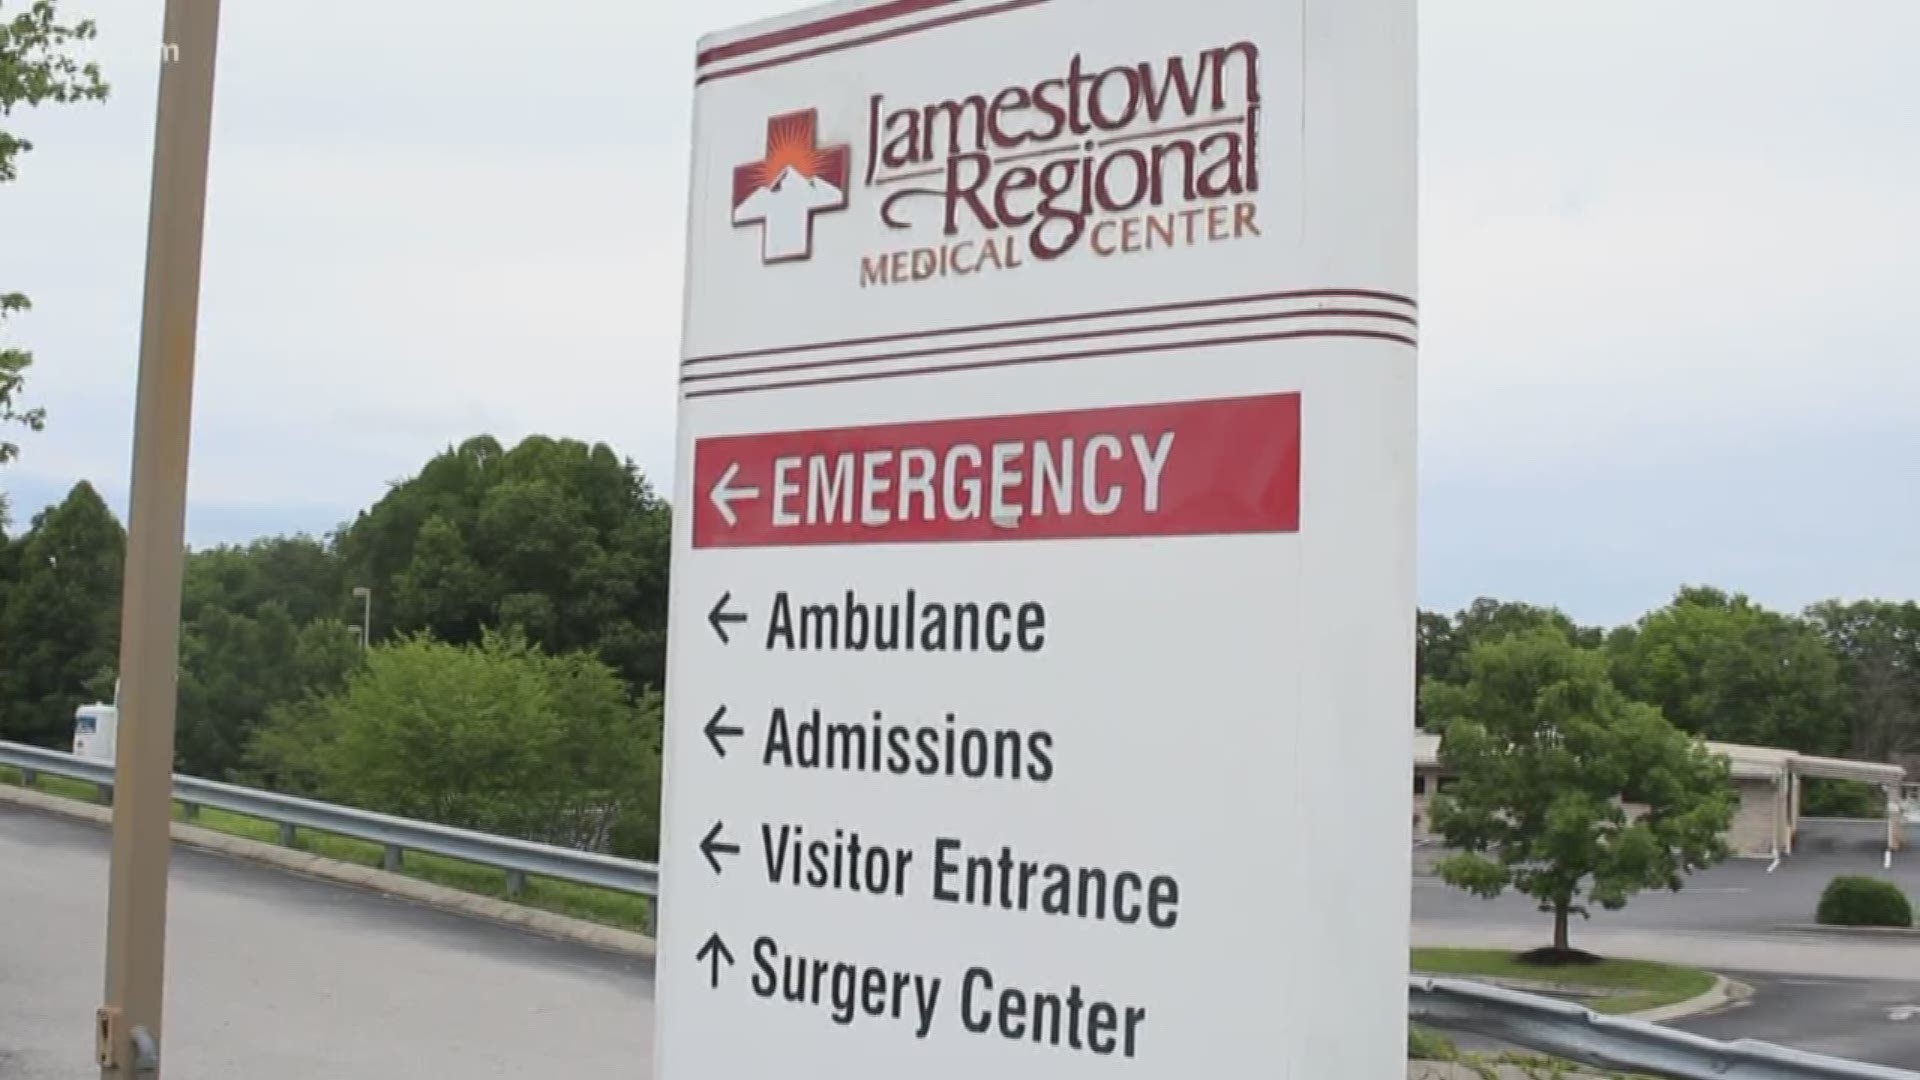 The federal centers for medicare and Medicaid services haven't received any documents from Rennova's Jamestown hospital, even though the company told us last week it submitted paperwork to be reinstated.